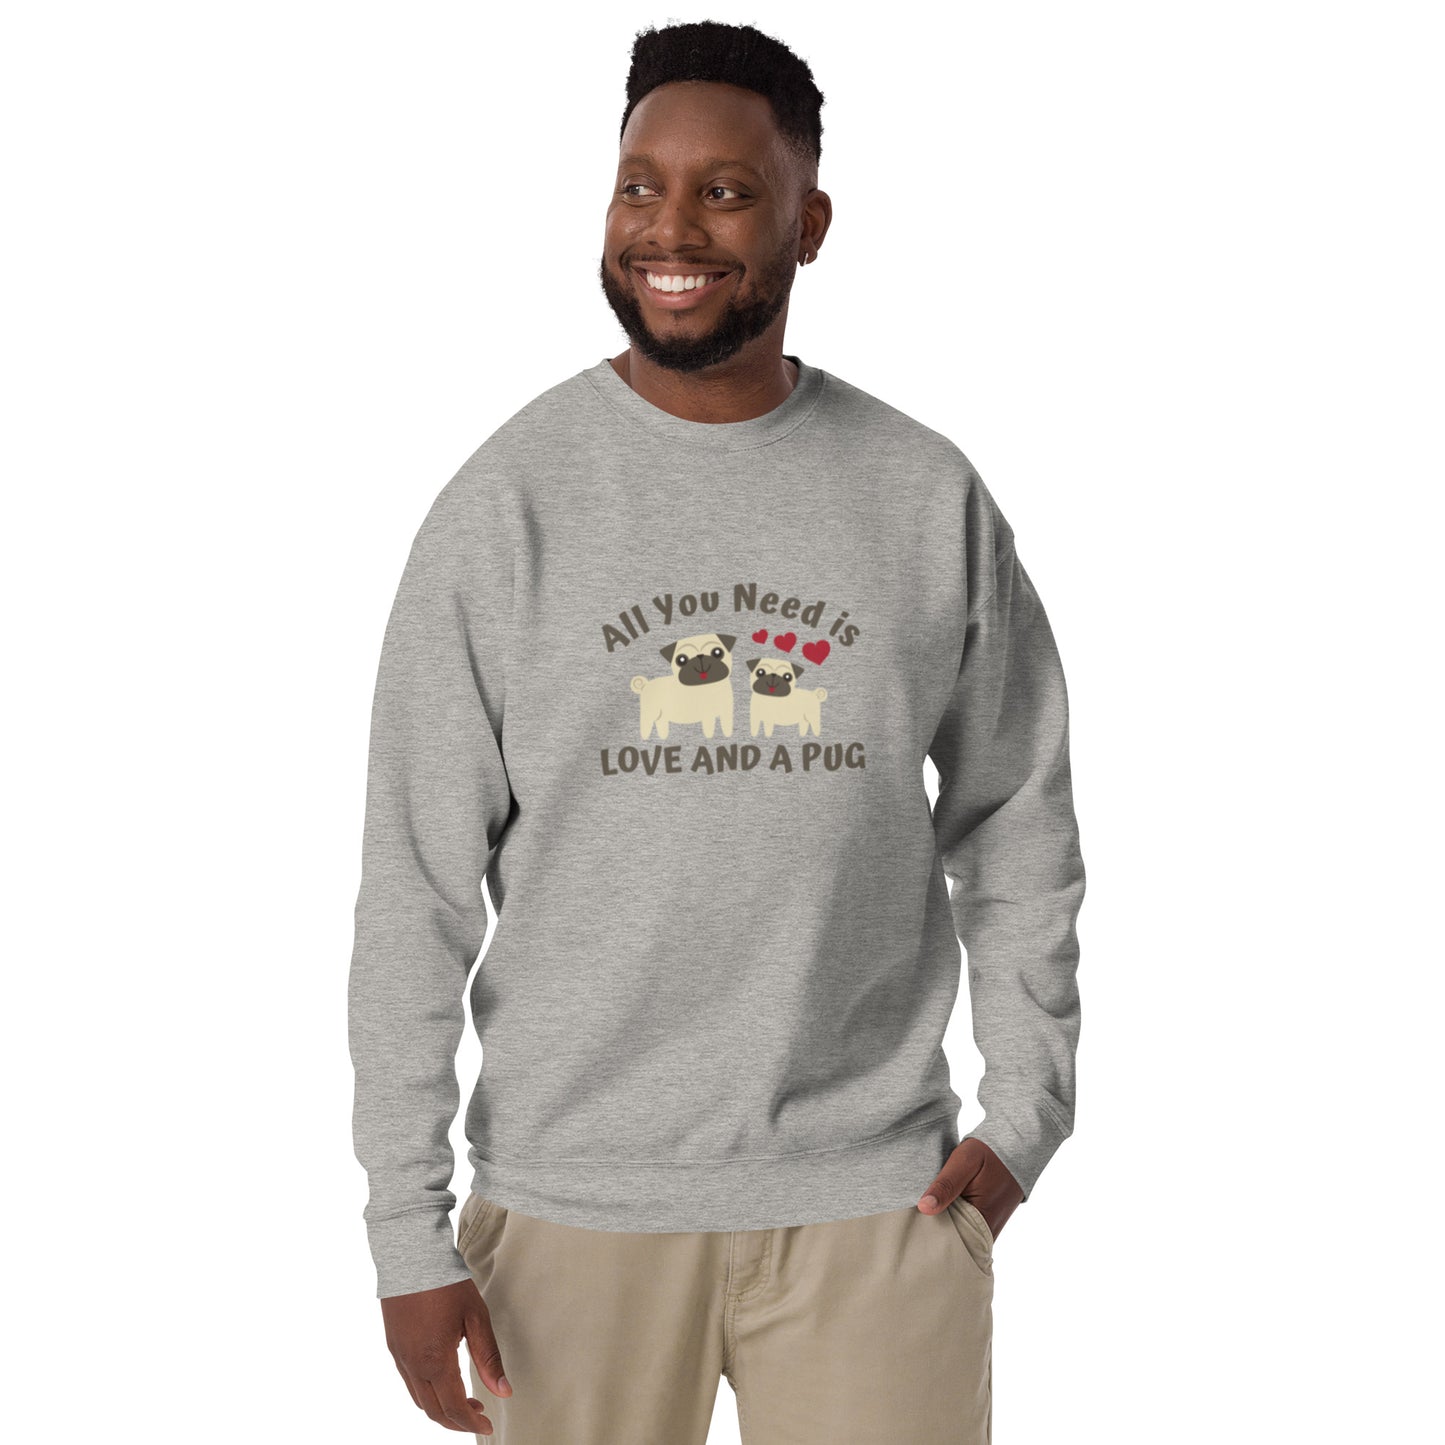 All You Need is Love and a Pug - Sweatshirt